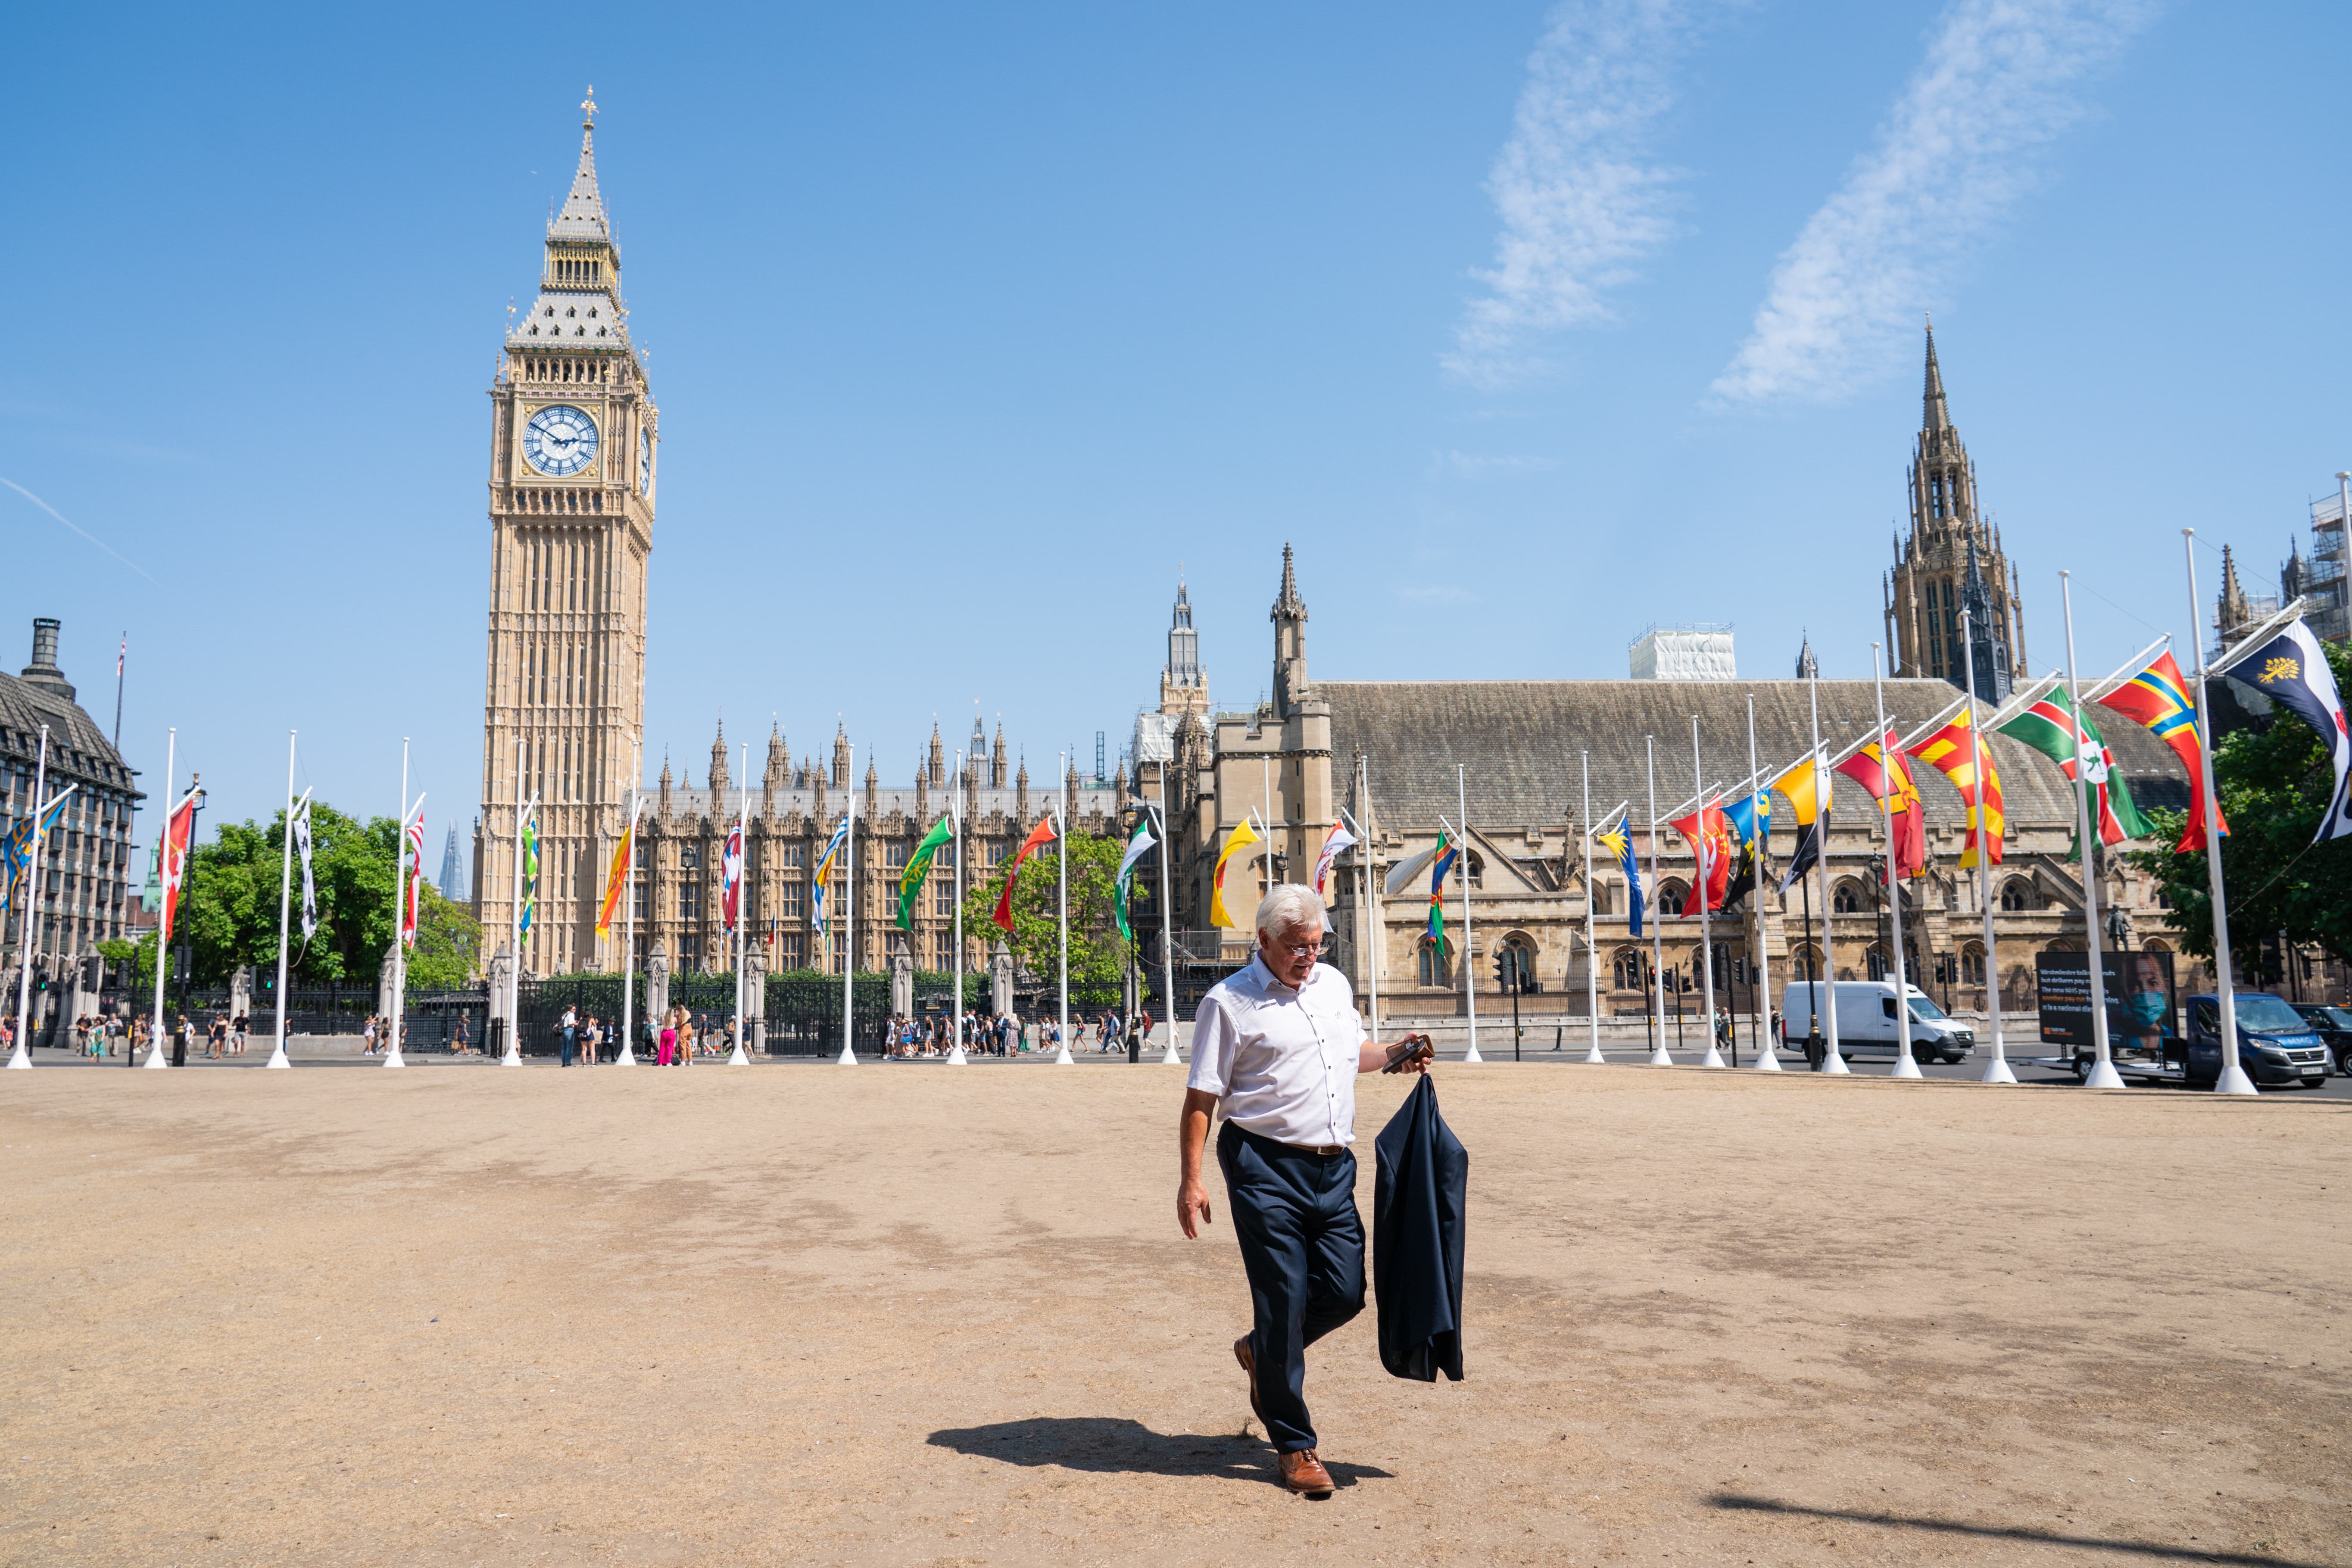 Only 275,000 daytime visitors went to central London on July 19 when temperatures hit 40C